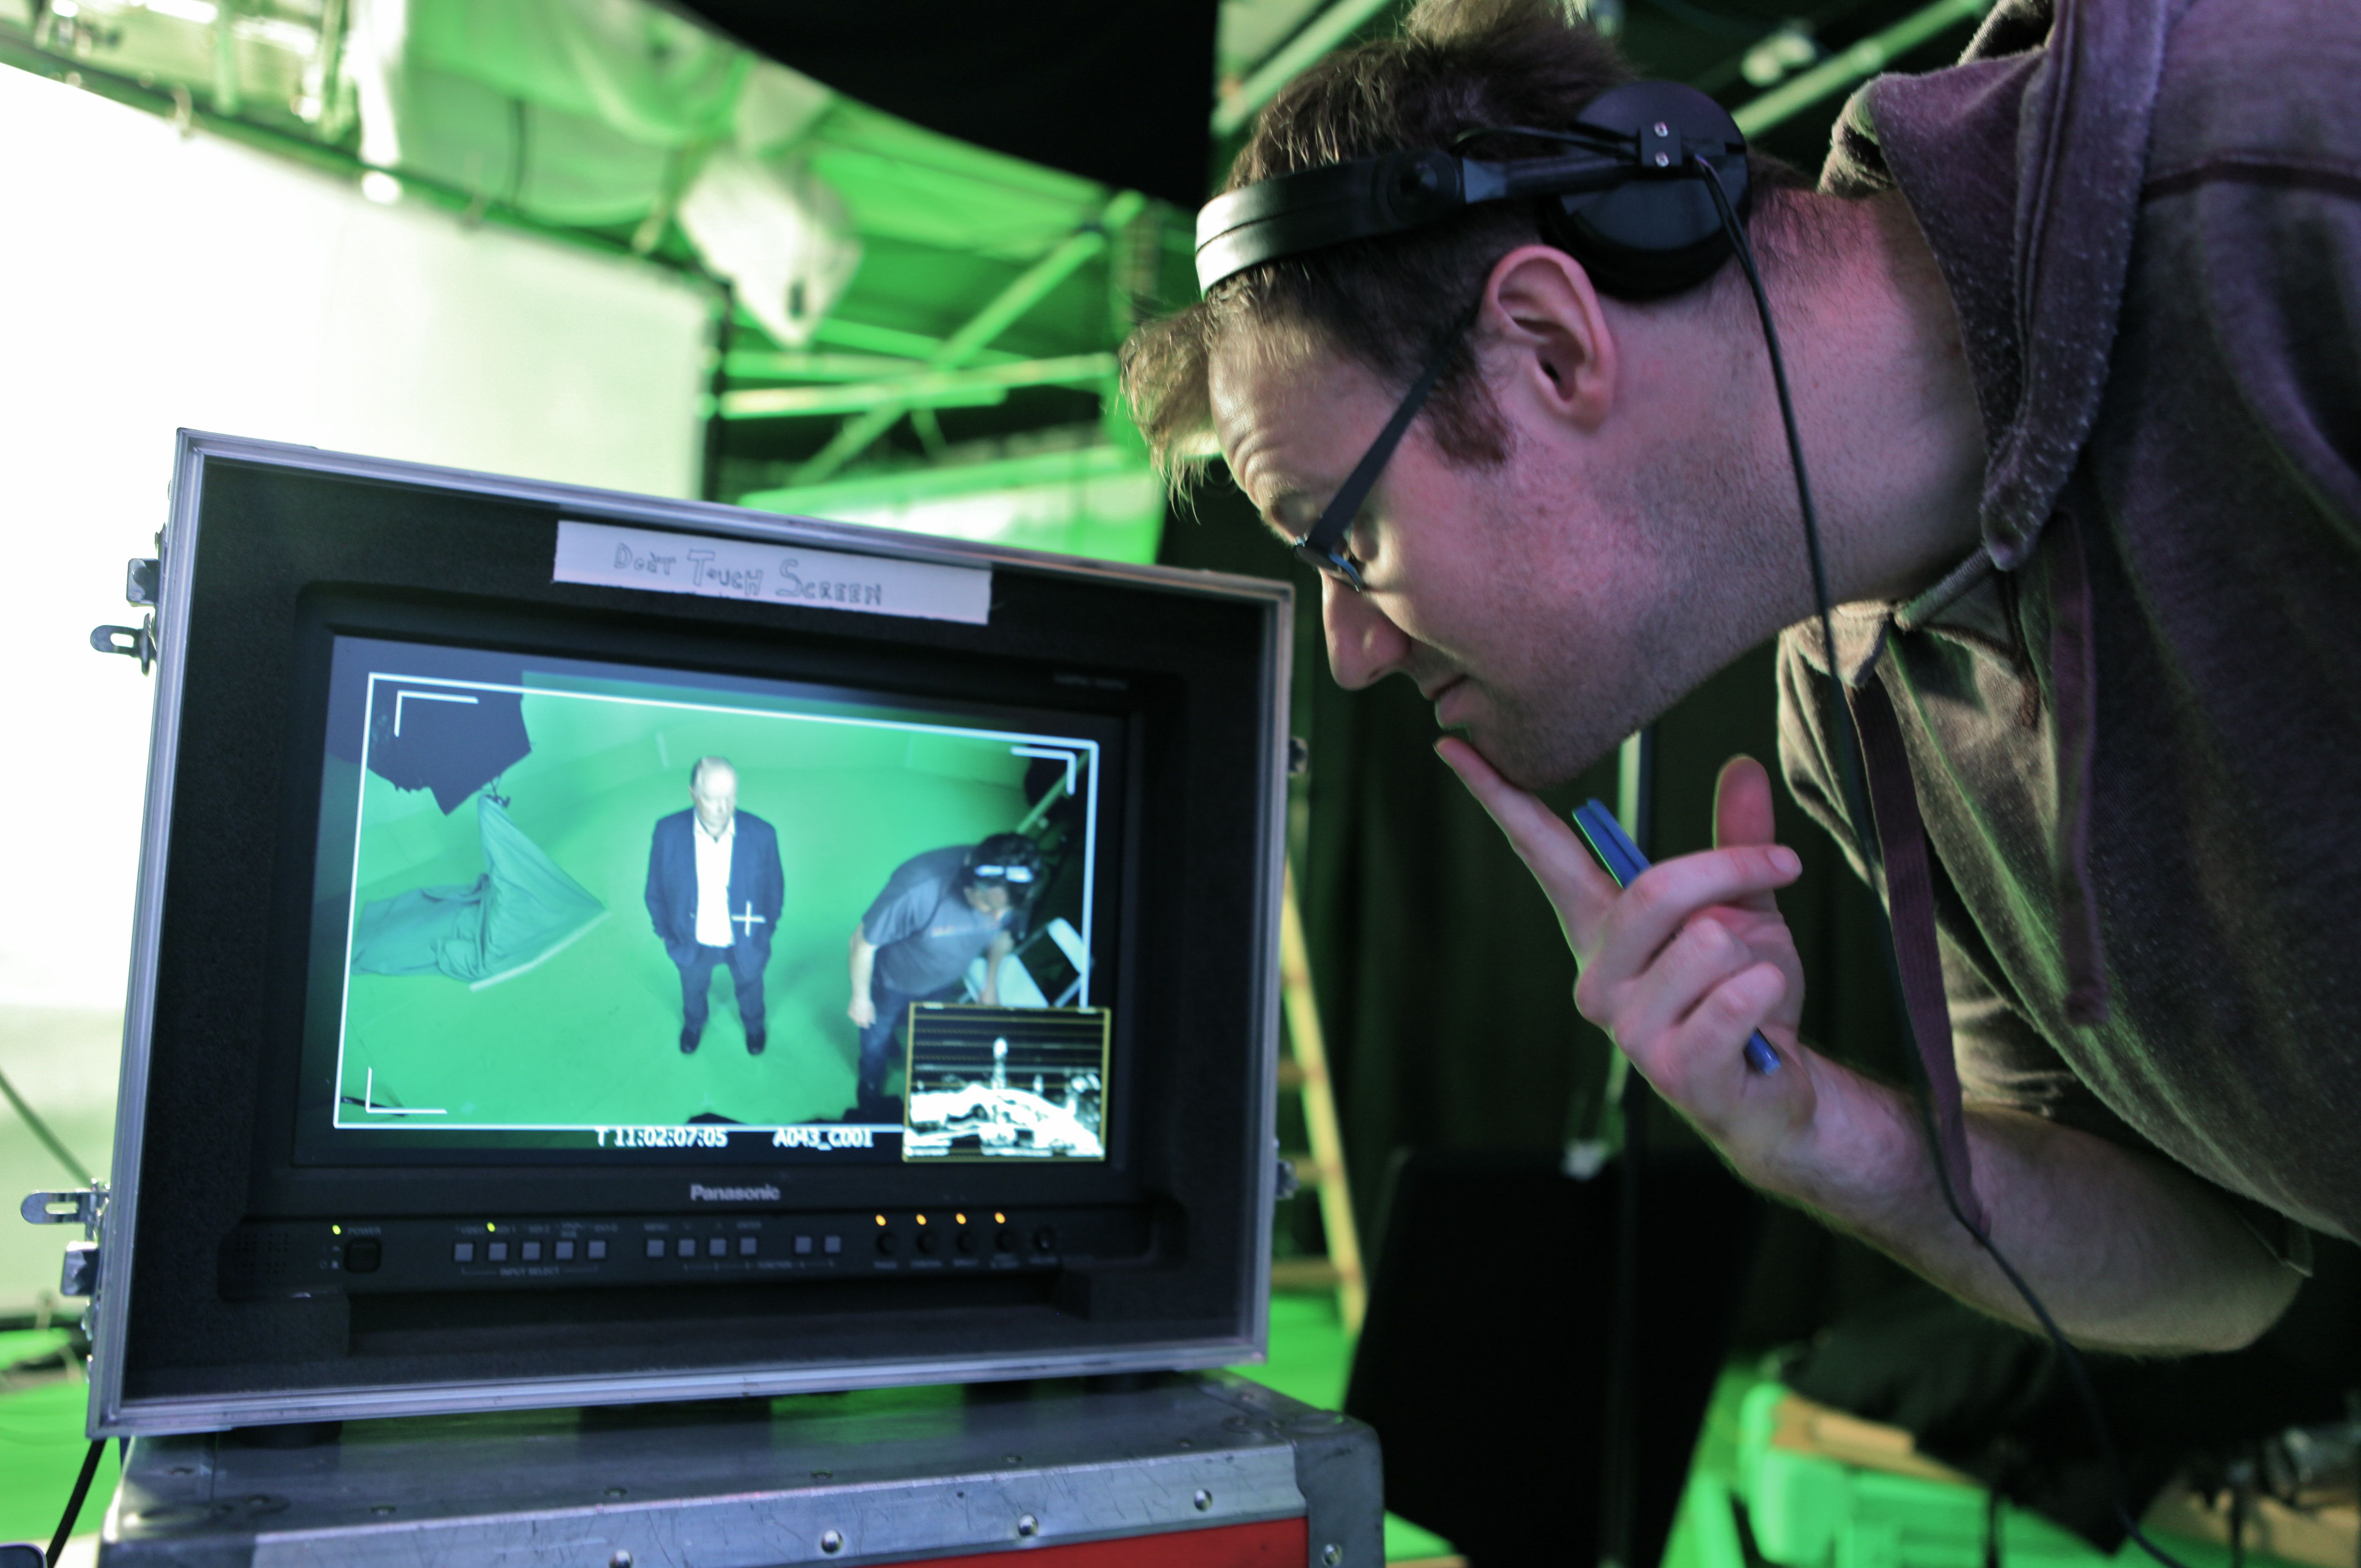 Diarmuid Goggins directing Greenscreen elements for the 2 part documentary series The Story of the Irish Language.